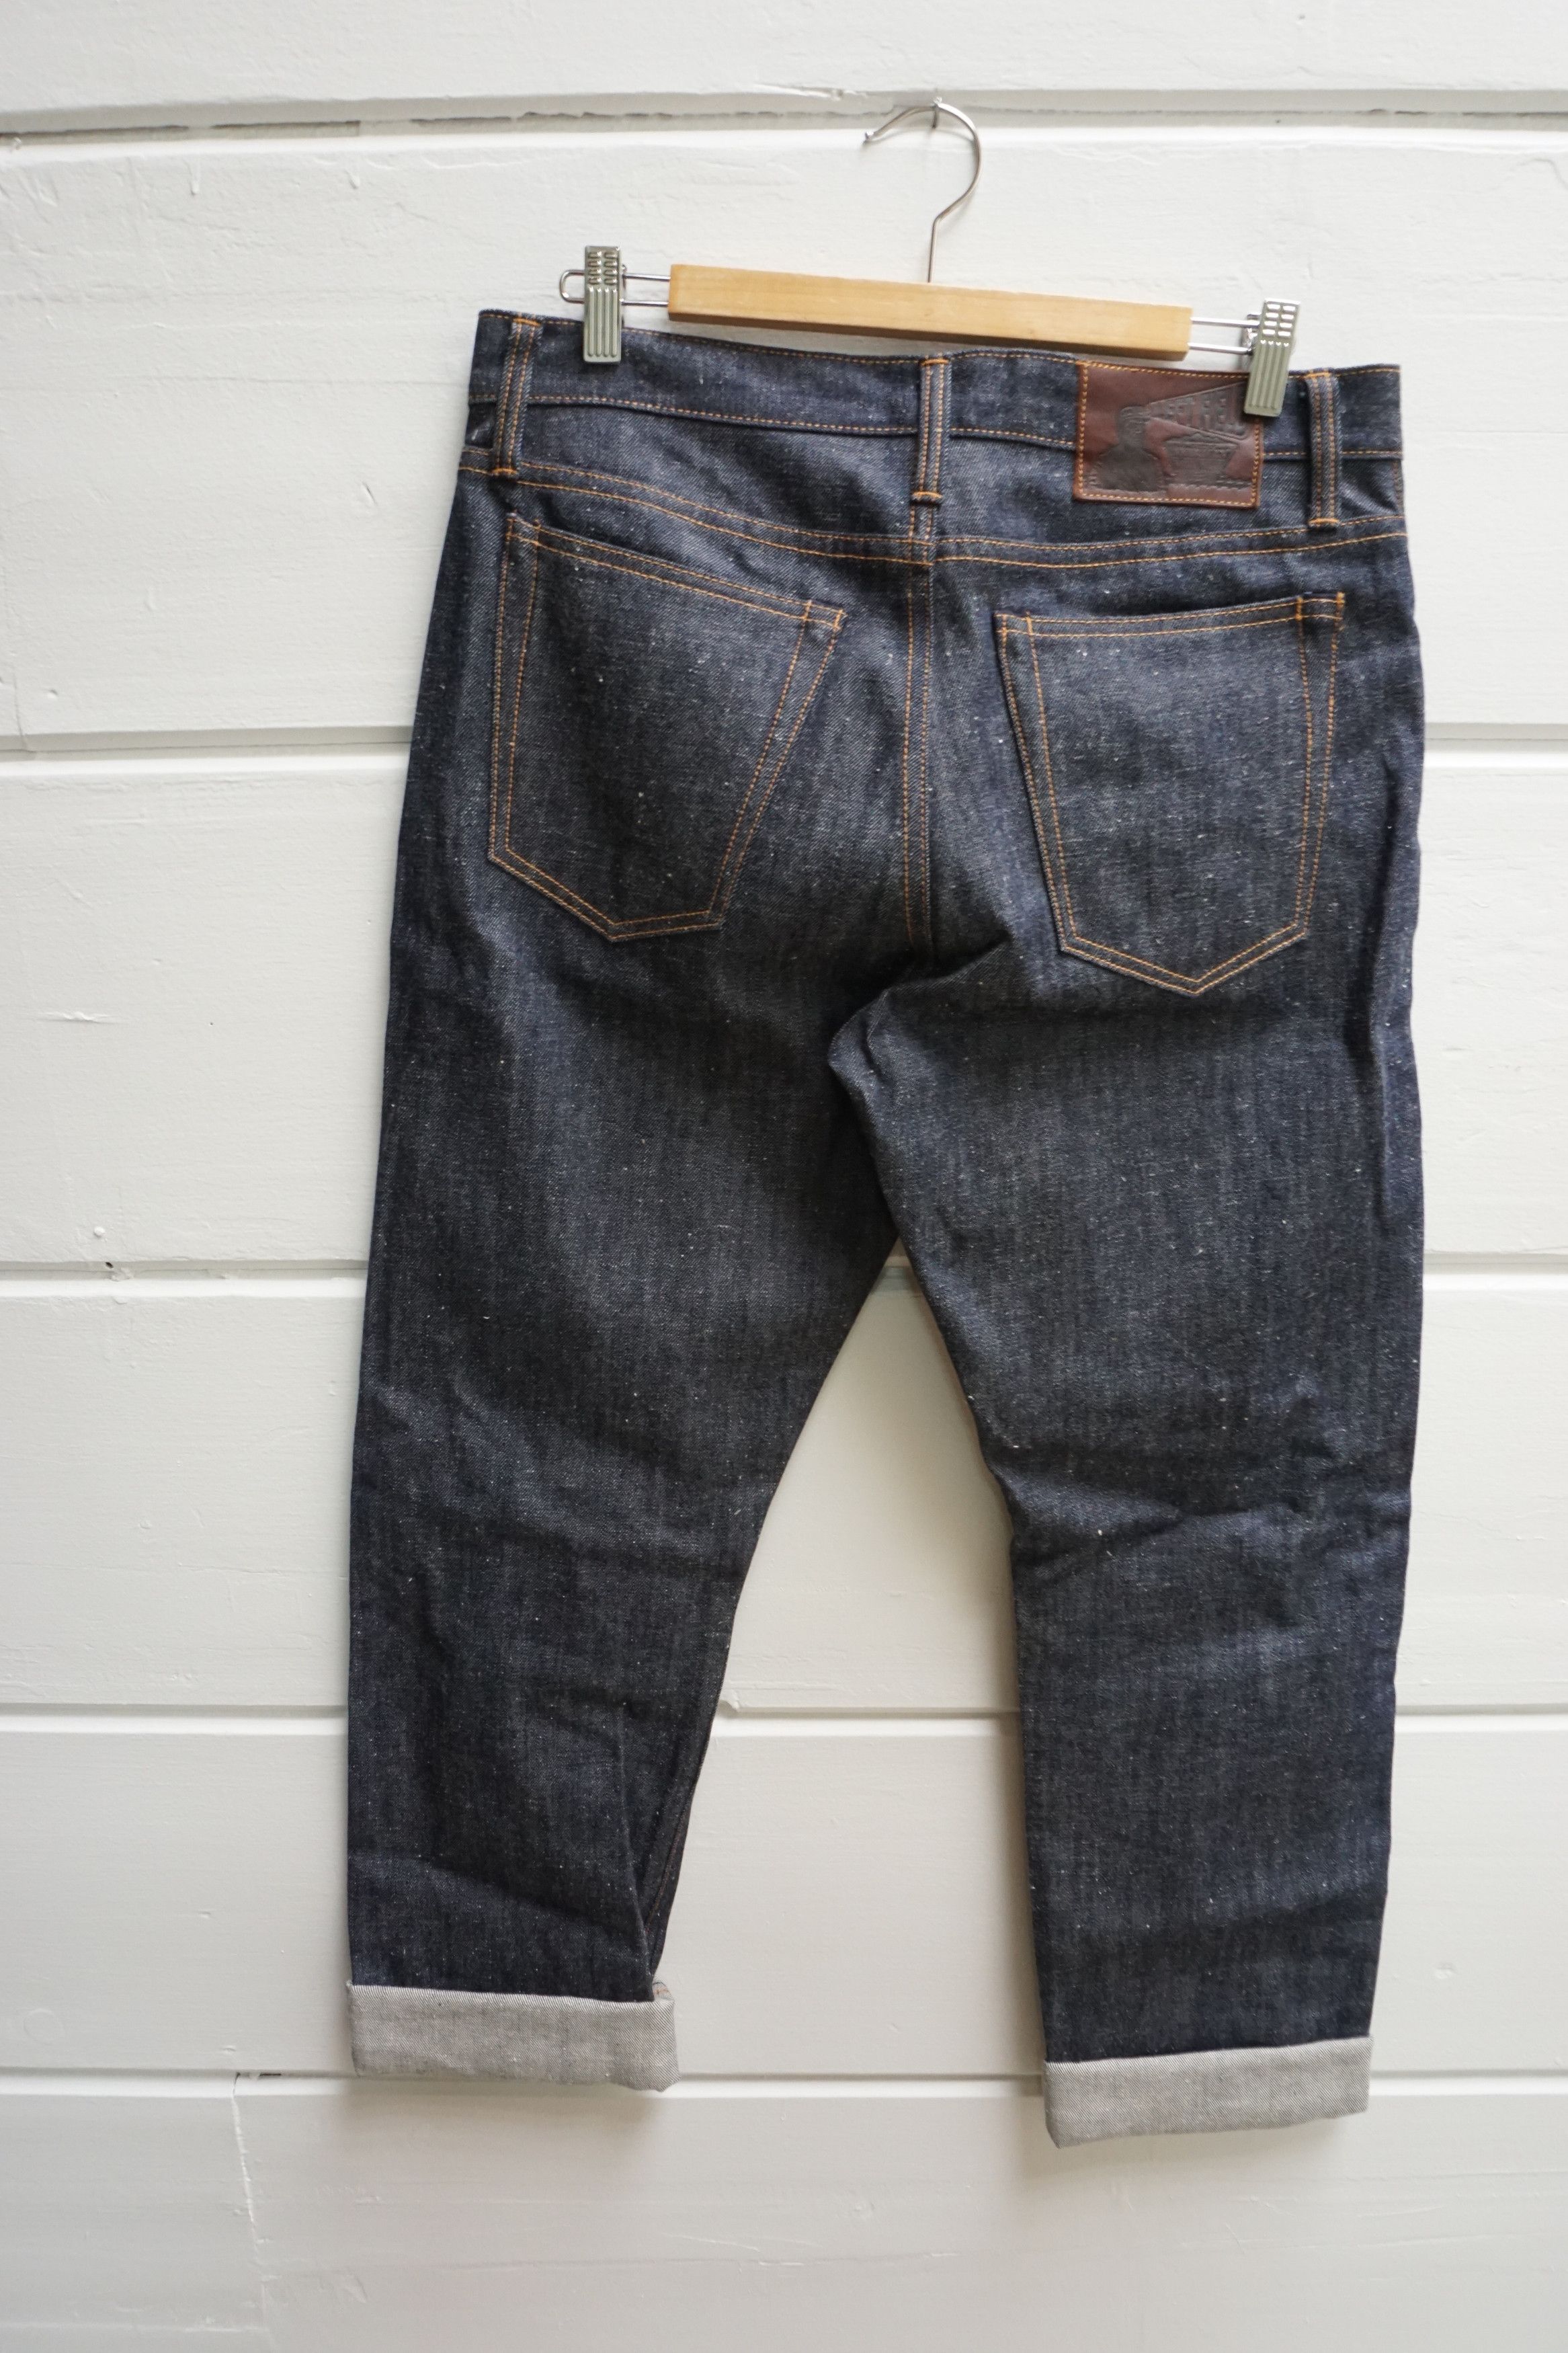 Left Field Nyc Greaser jean candiani 14 oz Size US 33 - 2 Preview